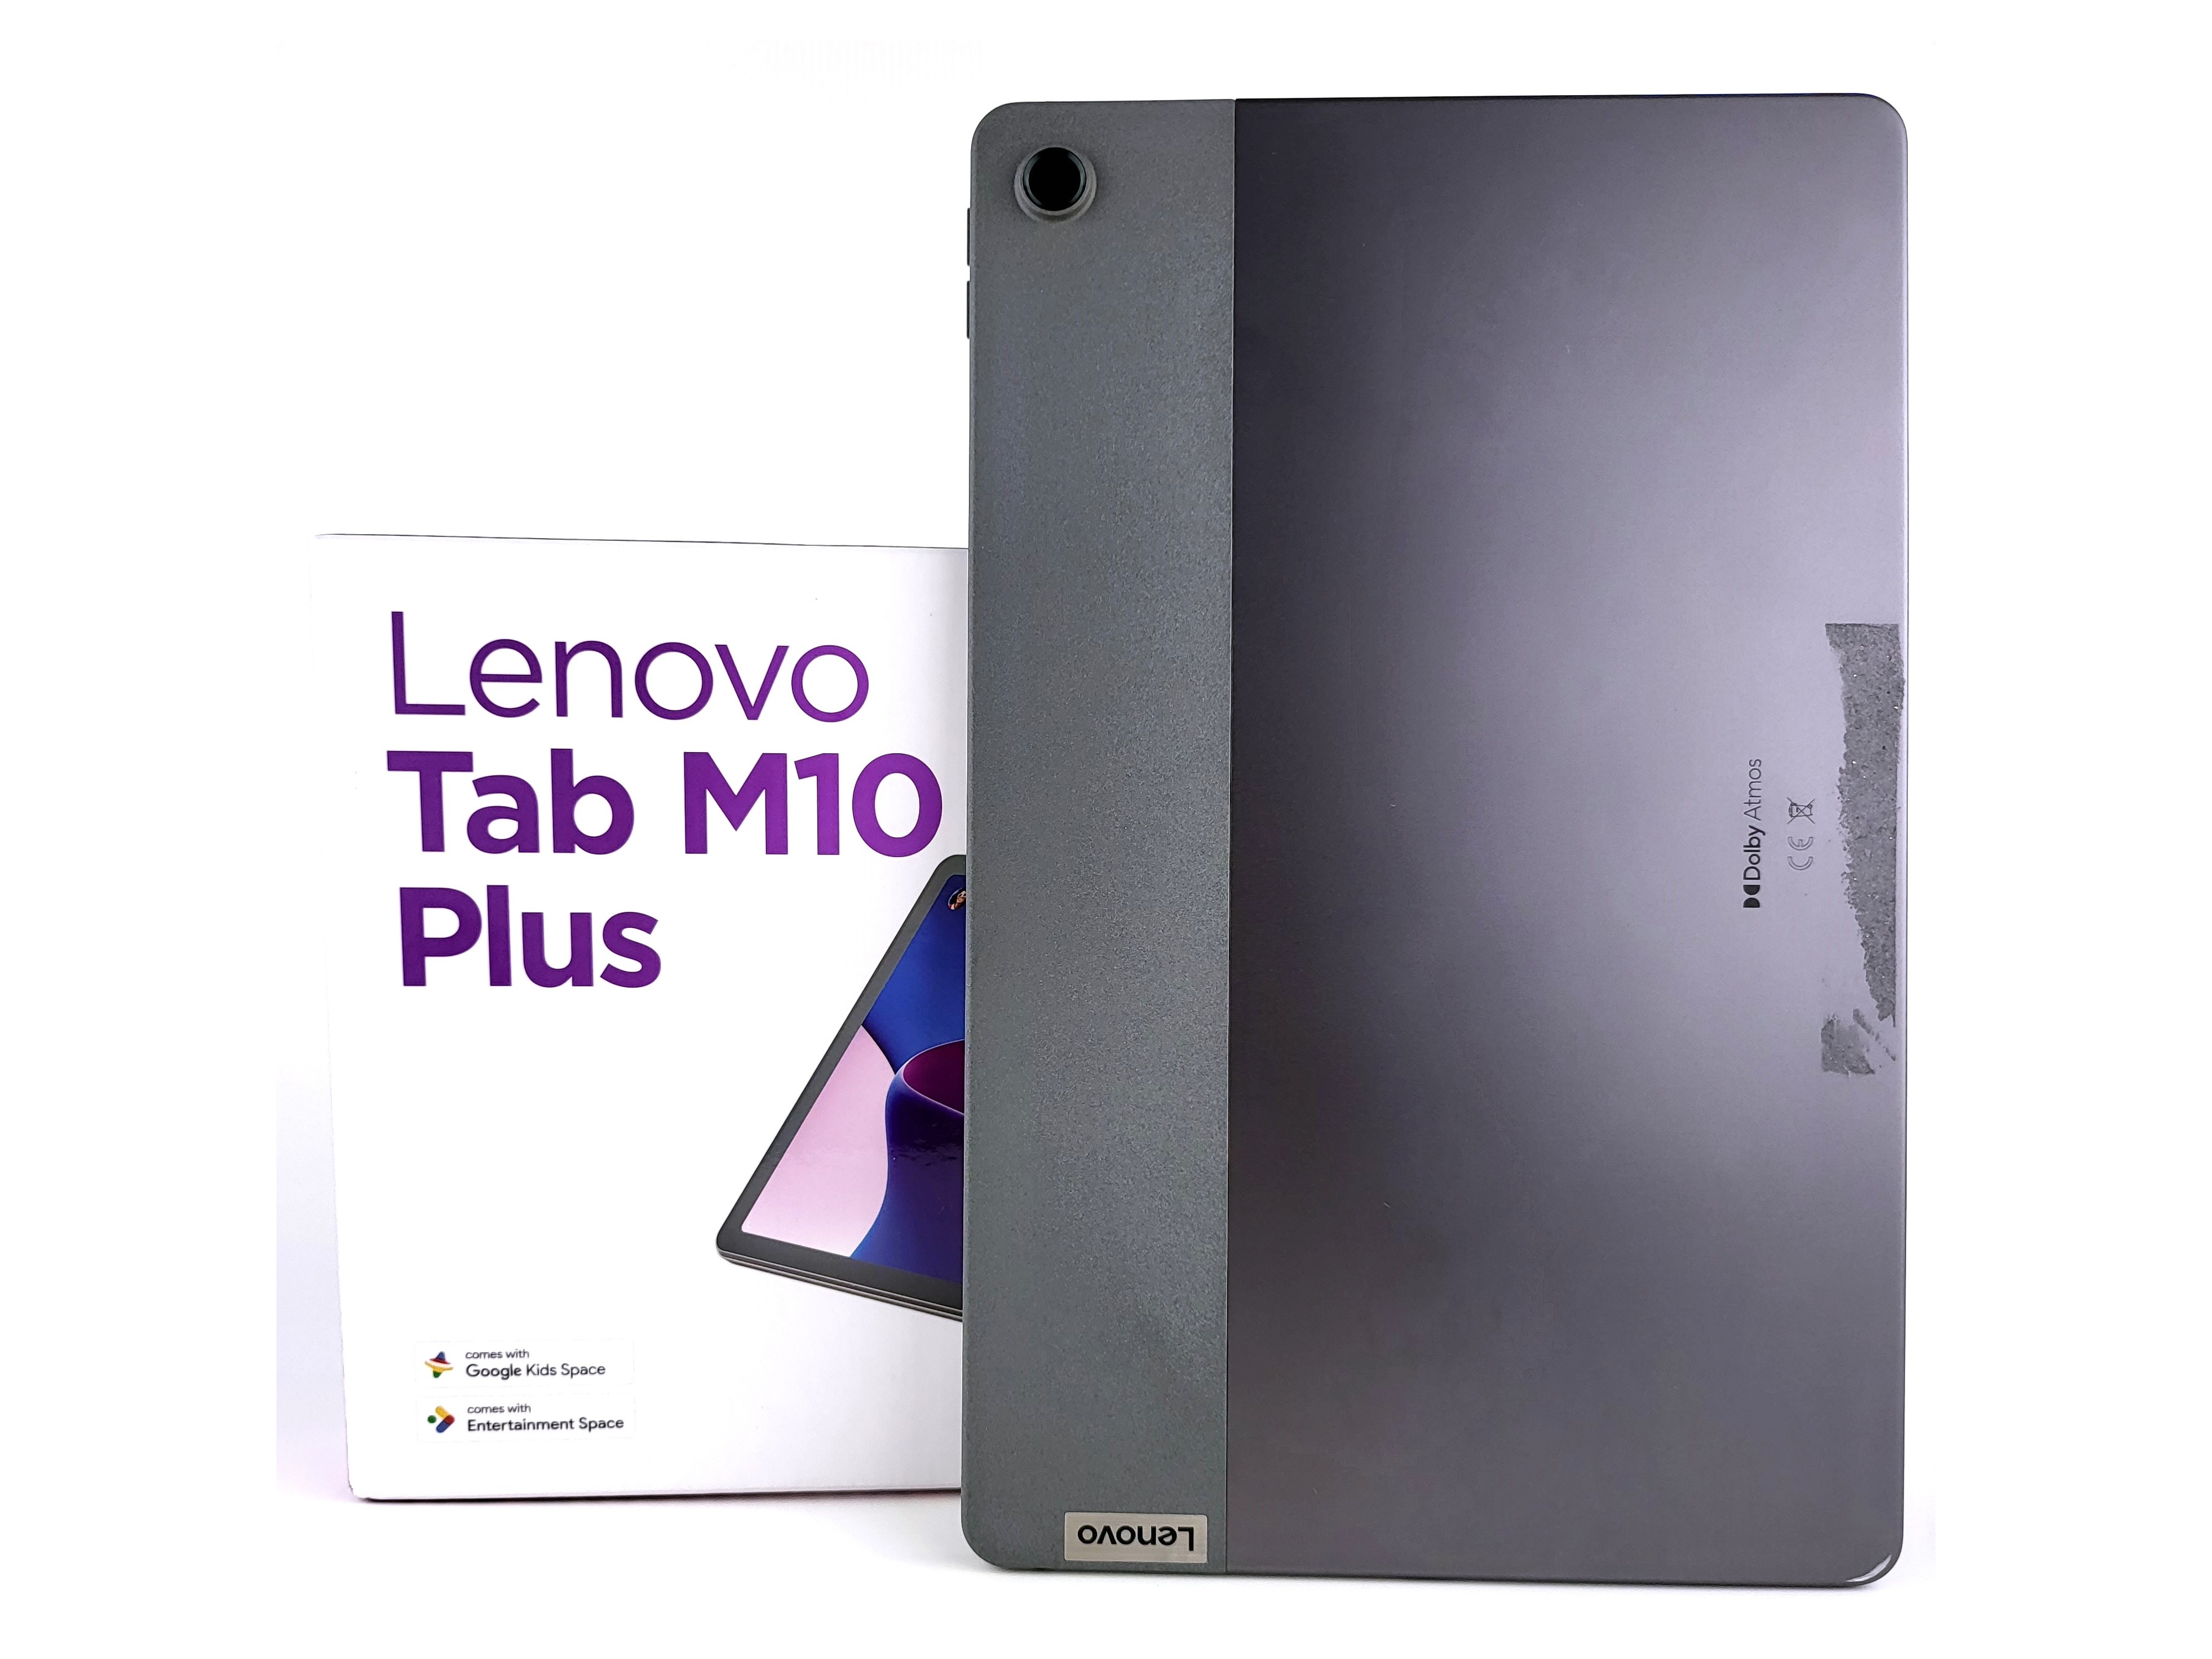 Gen main tablet Multimedia Plus the is NotebookCheck.net focus affordable - M10 Reviews Lenovo review verdict: 3 Tab the of